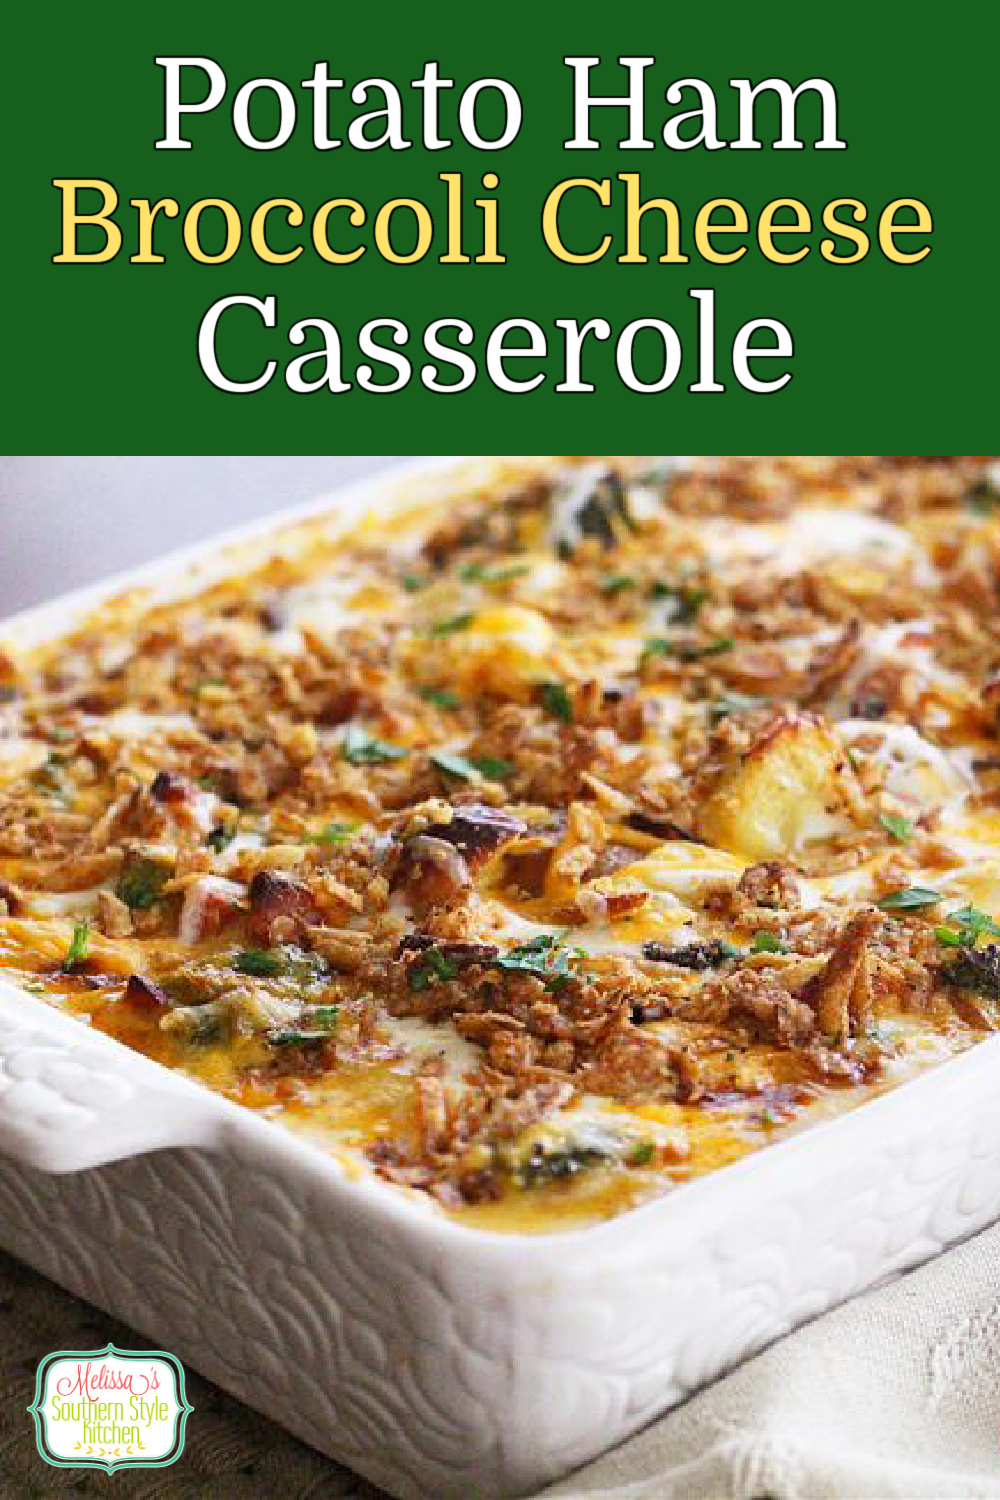 This cheesy Potato Ham and Broccoli Cheese Casserole is a one dish meal ideal for any day of the week #broccolicheese #broccolicheddarcasserole #potatocasserole #leftoverhamrecipes #casseroles #food #southernrecipes #southernfood #melissassouthernstylekitchenh #potatorecipes #dinner #dinnerideas #bestcasserolerecipes via @melissasssk